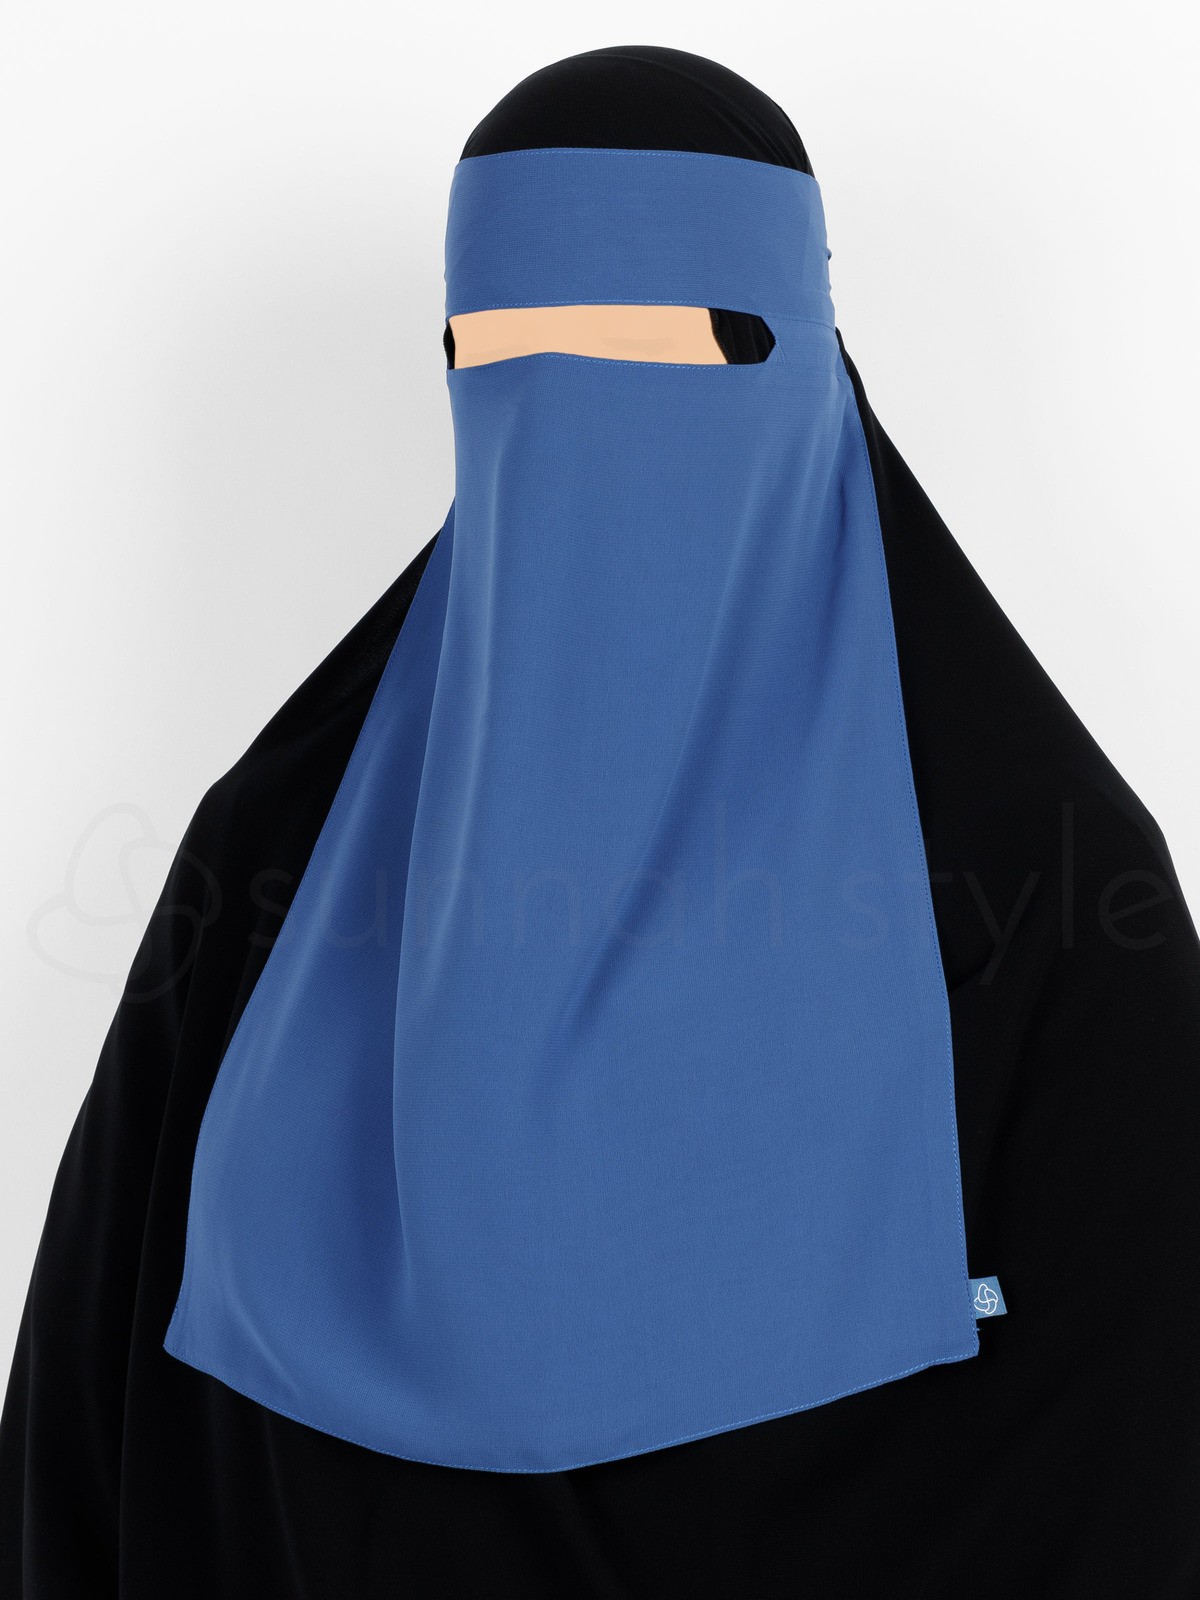 Sunnah Style - No-Pinch One Layer Niqab (Blue Jay)